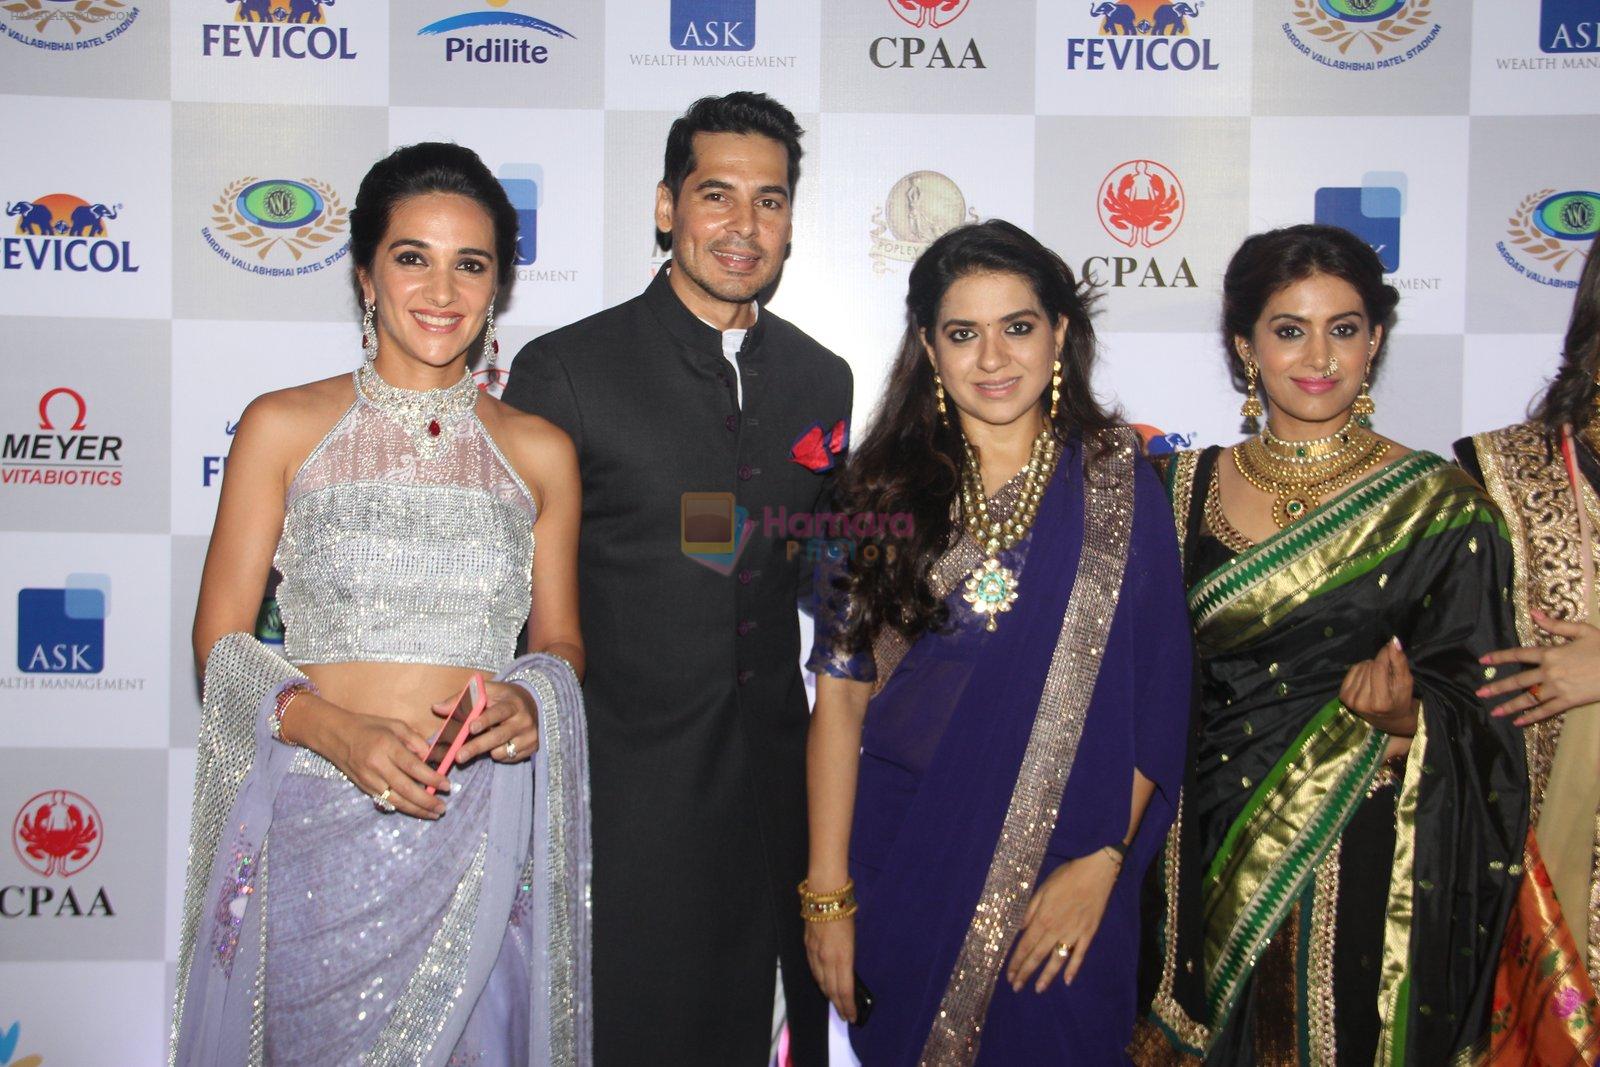 at CPAA Fevicol SHOW on 20th March 2016